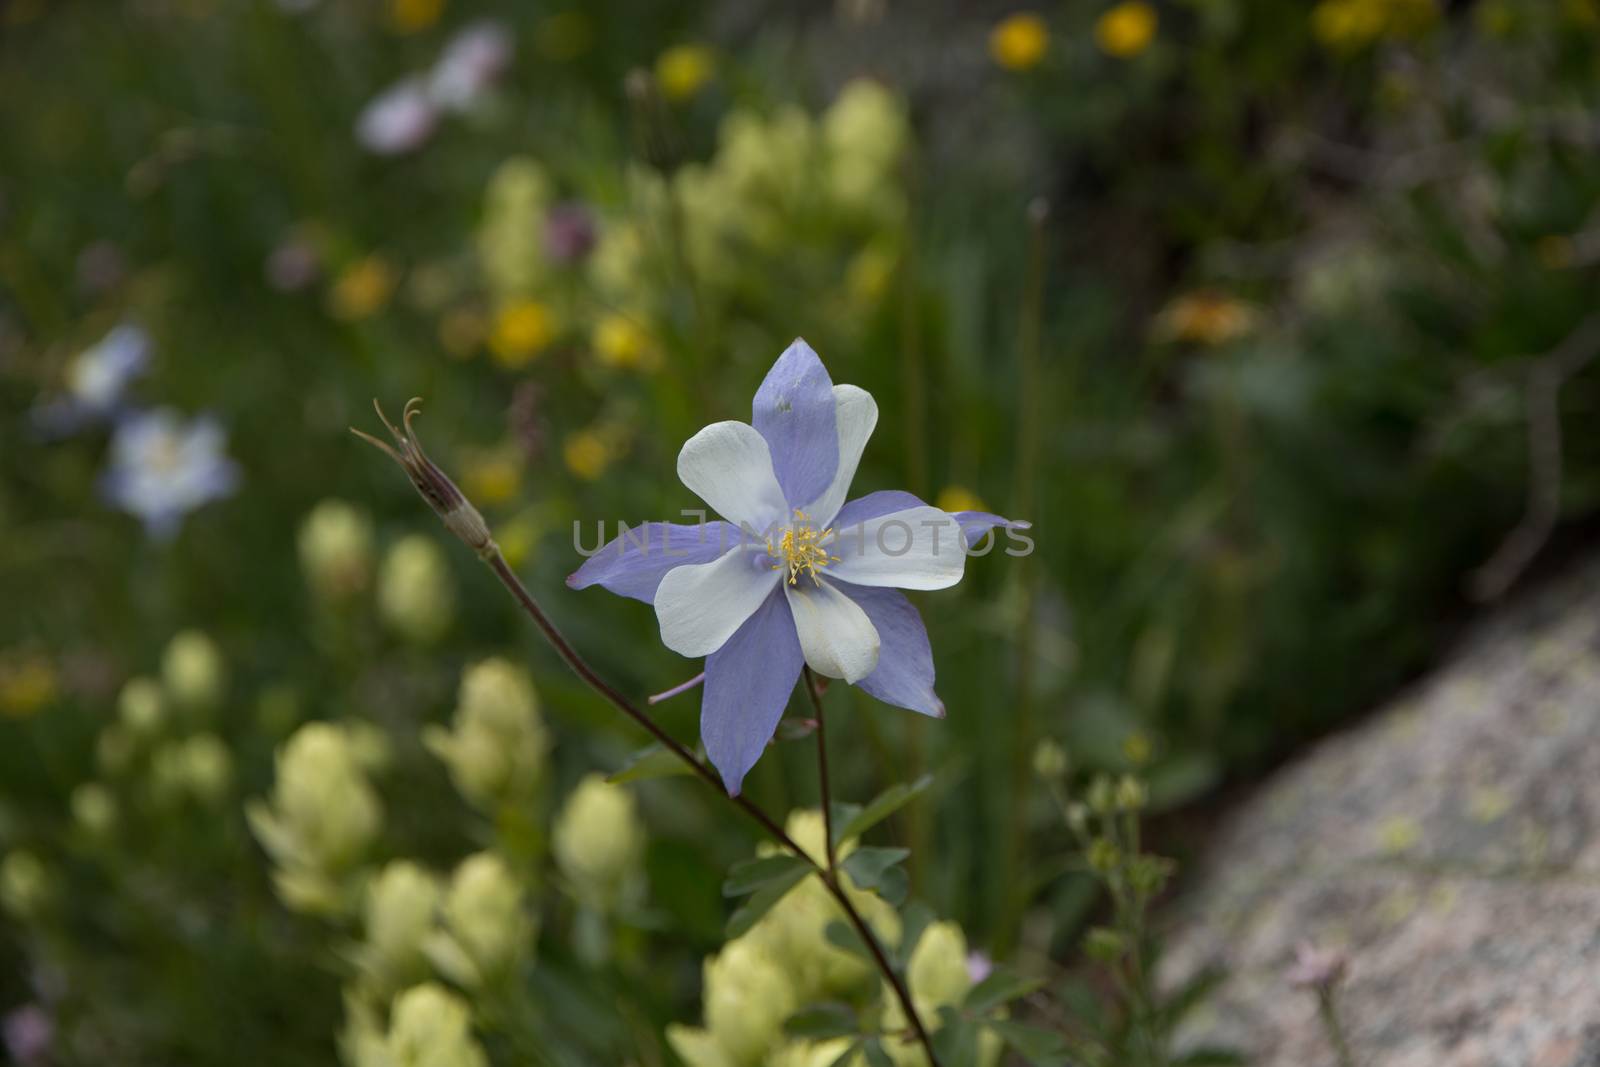 In a year with overwhelming numbers of wildflowers in the Colorado Rocky Mountains, this columbine grew, surrounded by other yellow wildflowers.